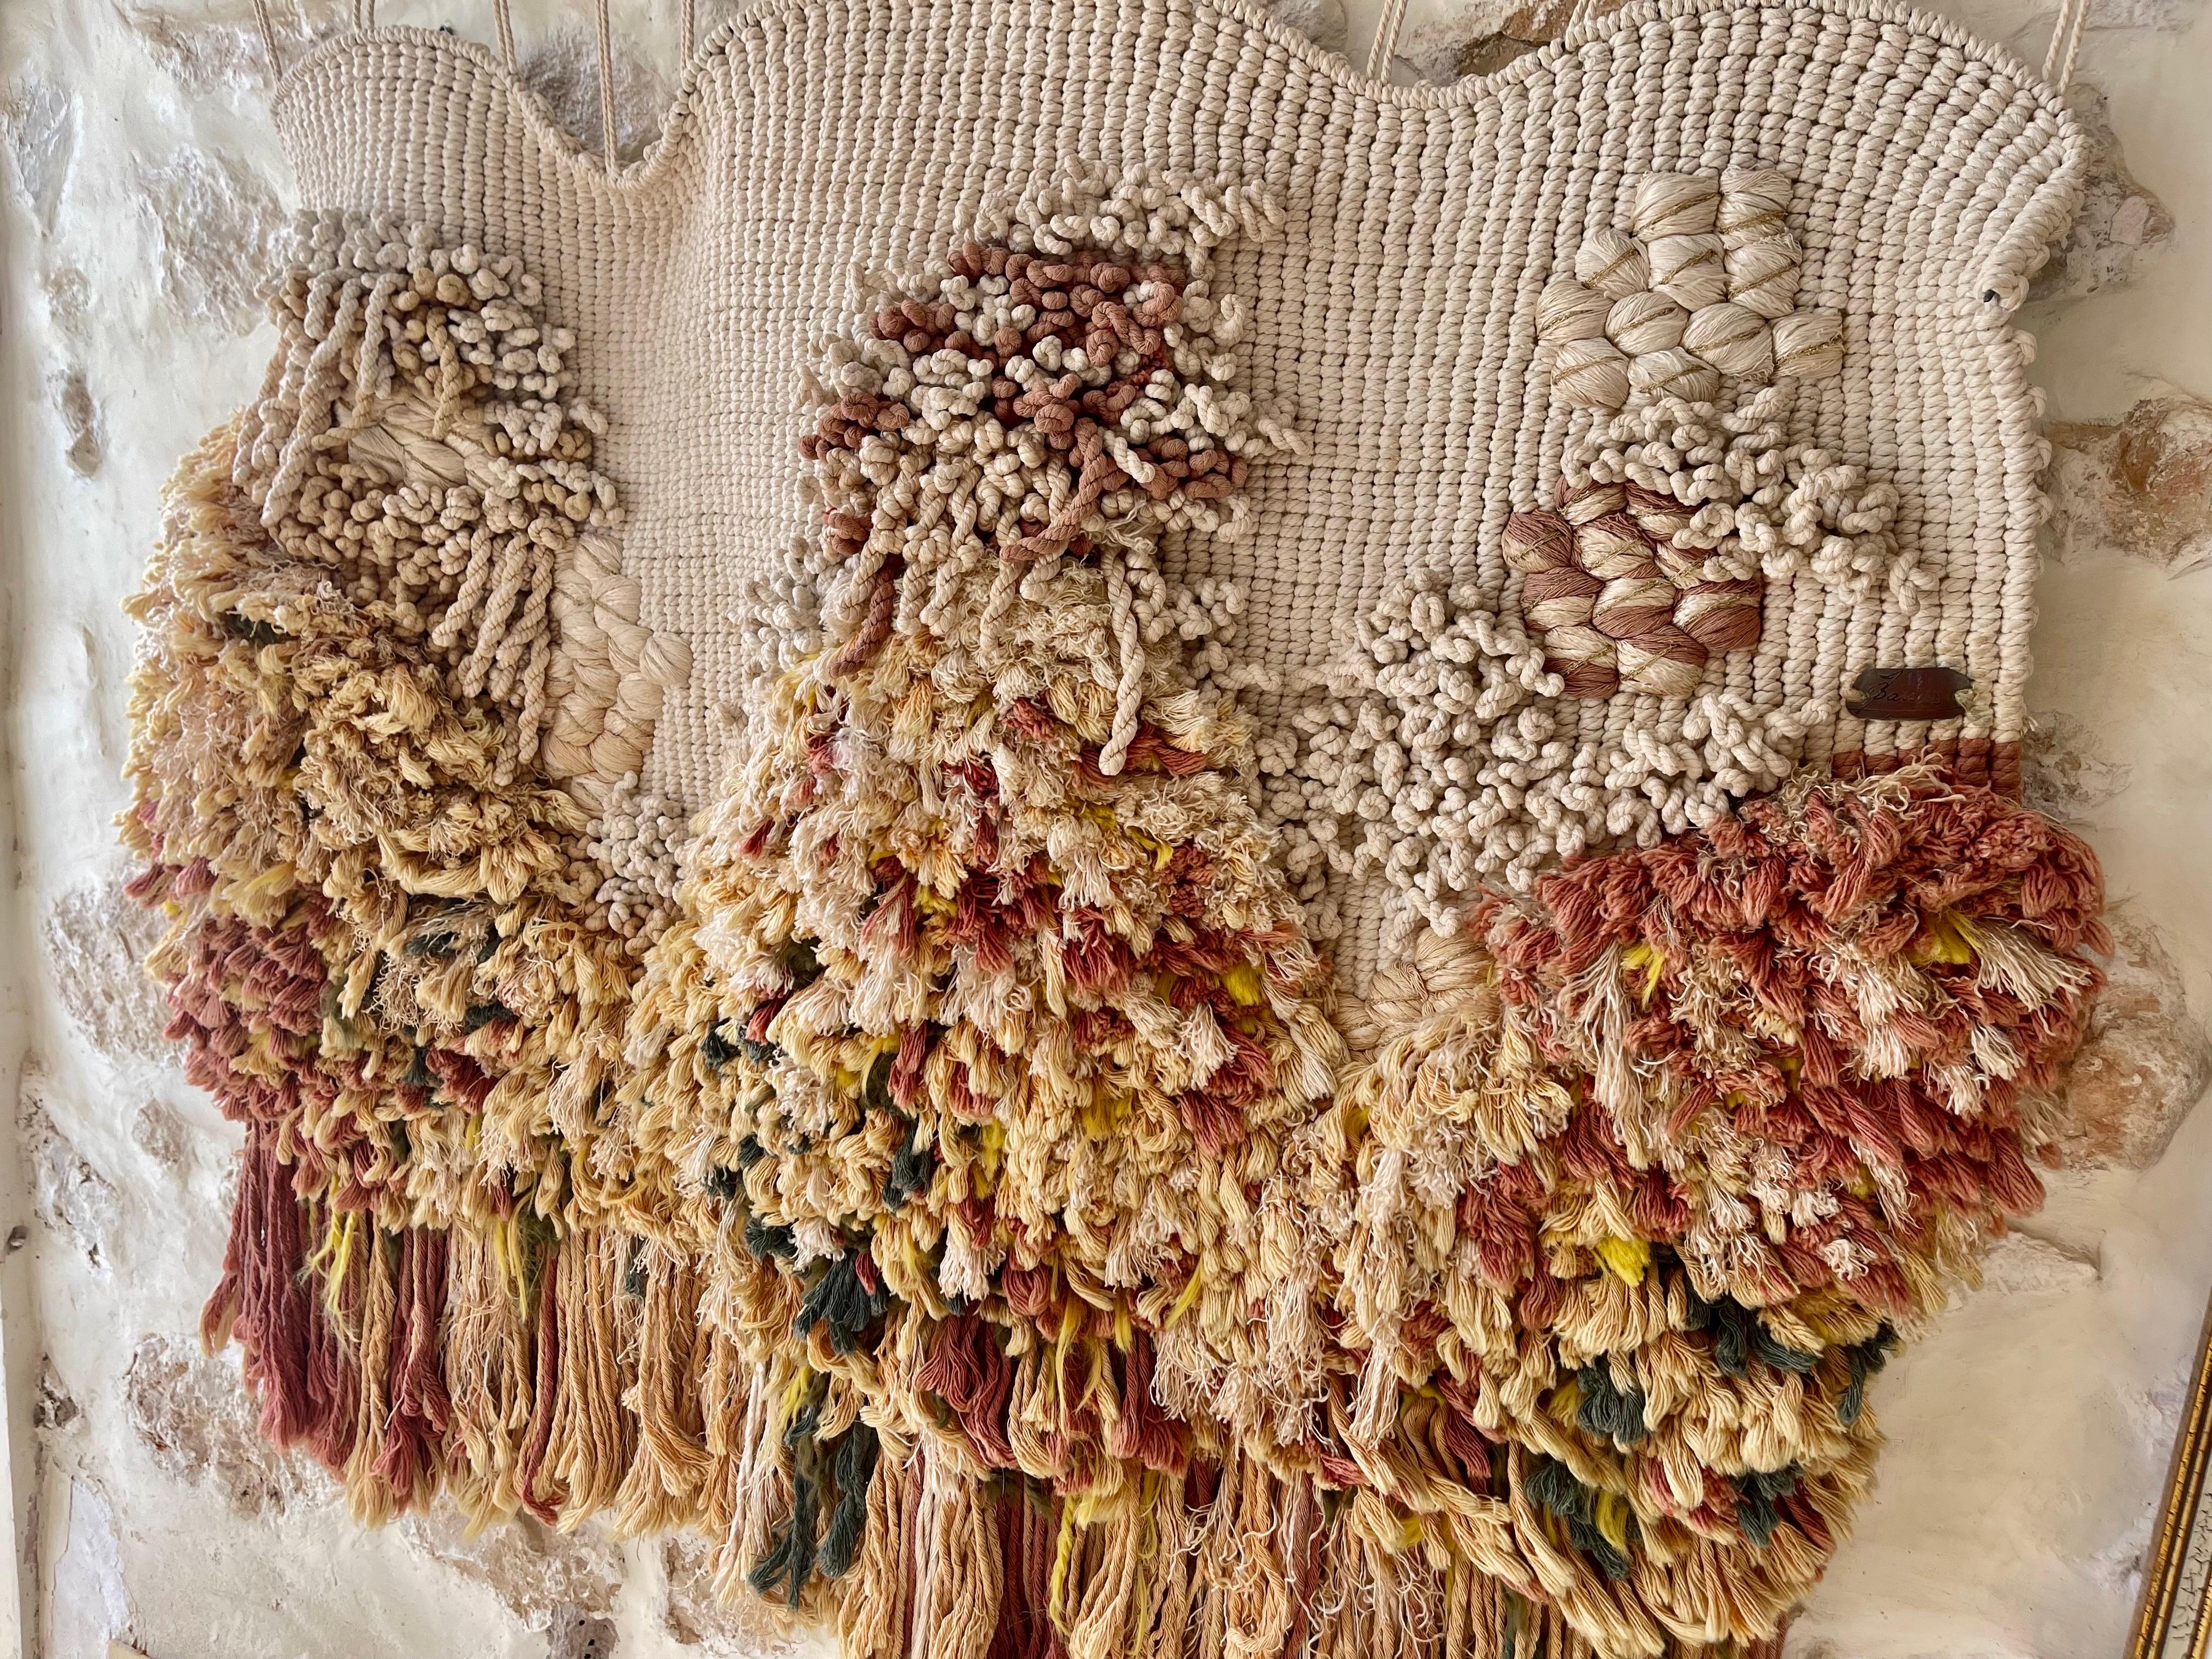 Modern Design ! Neo Classique ! bohemian decor, macramé wall hangings should be at the top of your list. These lightweight, airy pieces are typically made with natural materials (think cotton cord and merino wool), and they create an instant